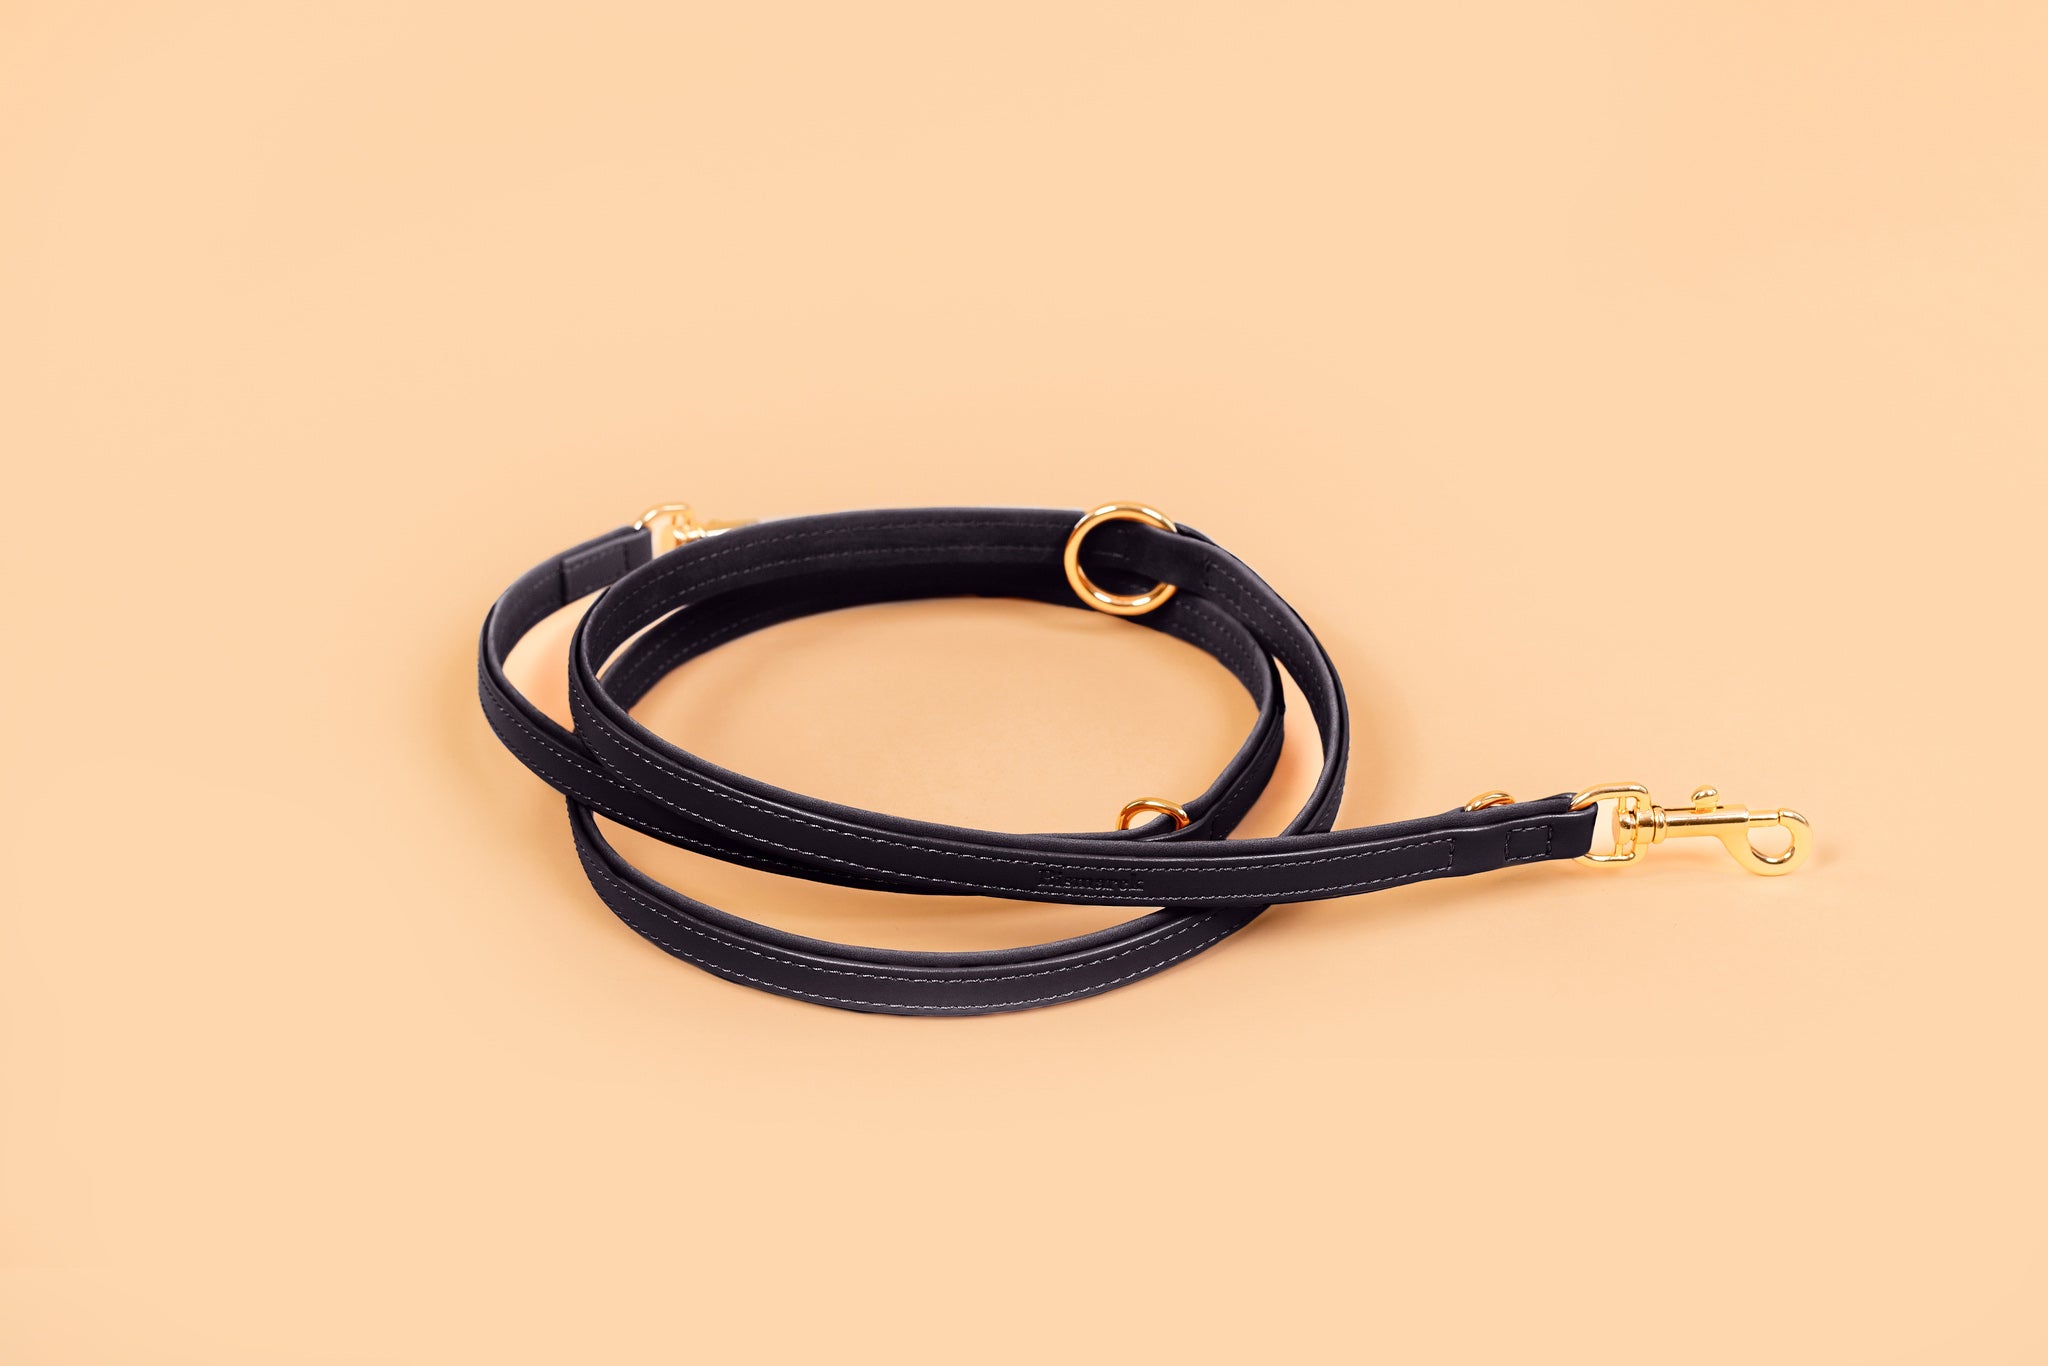 Apple Leather Leash in Royal Blue